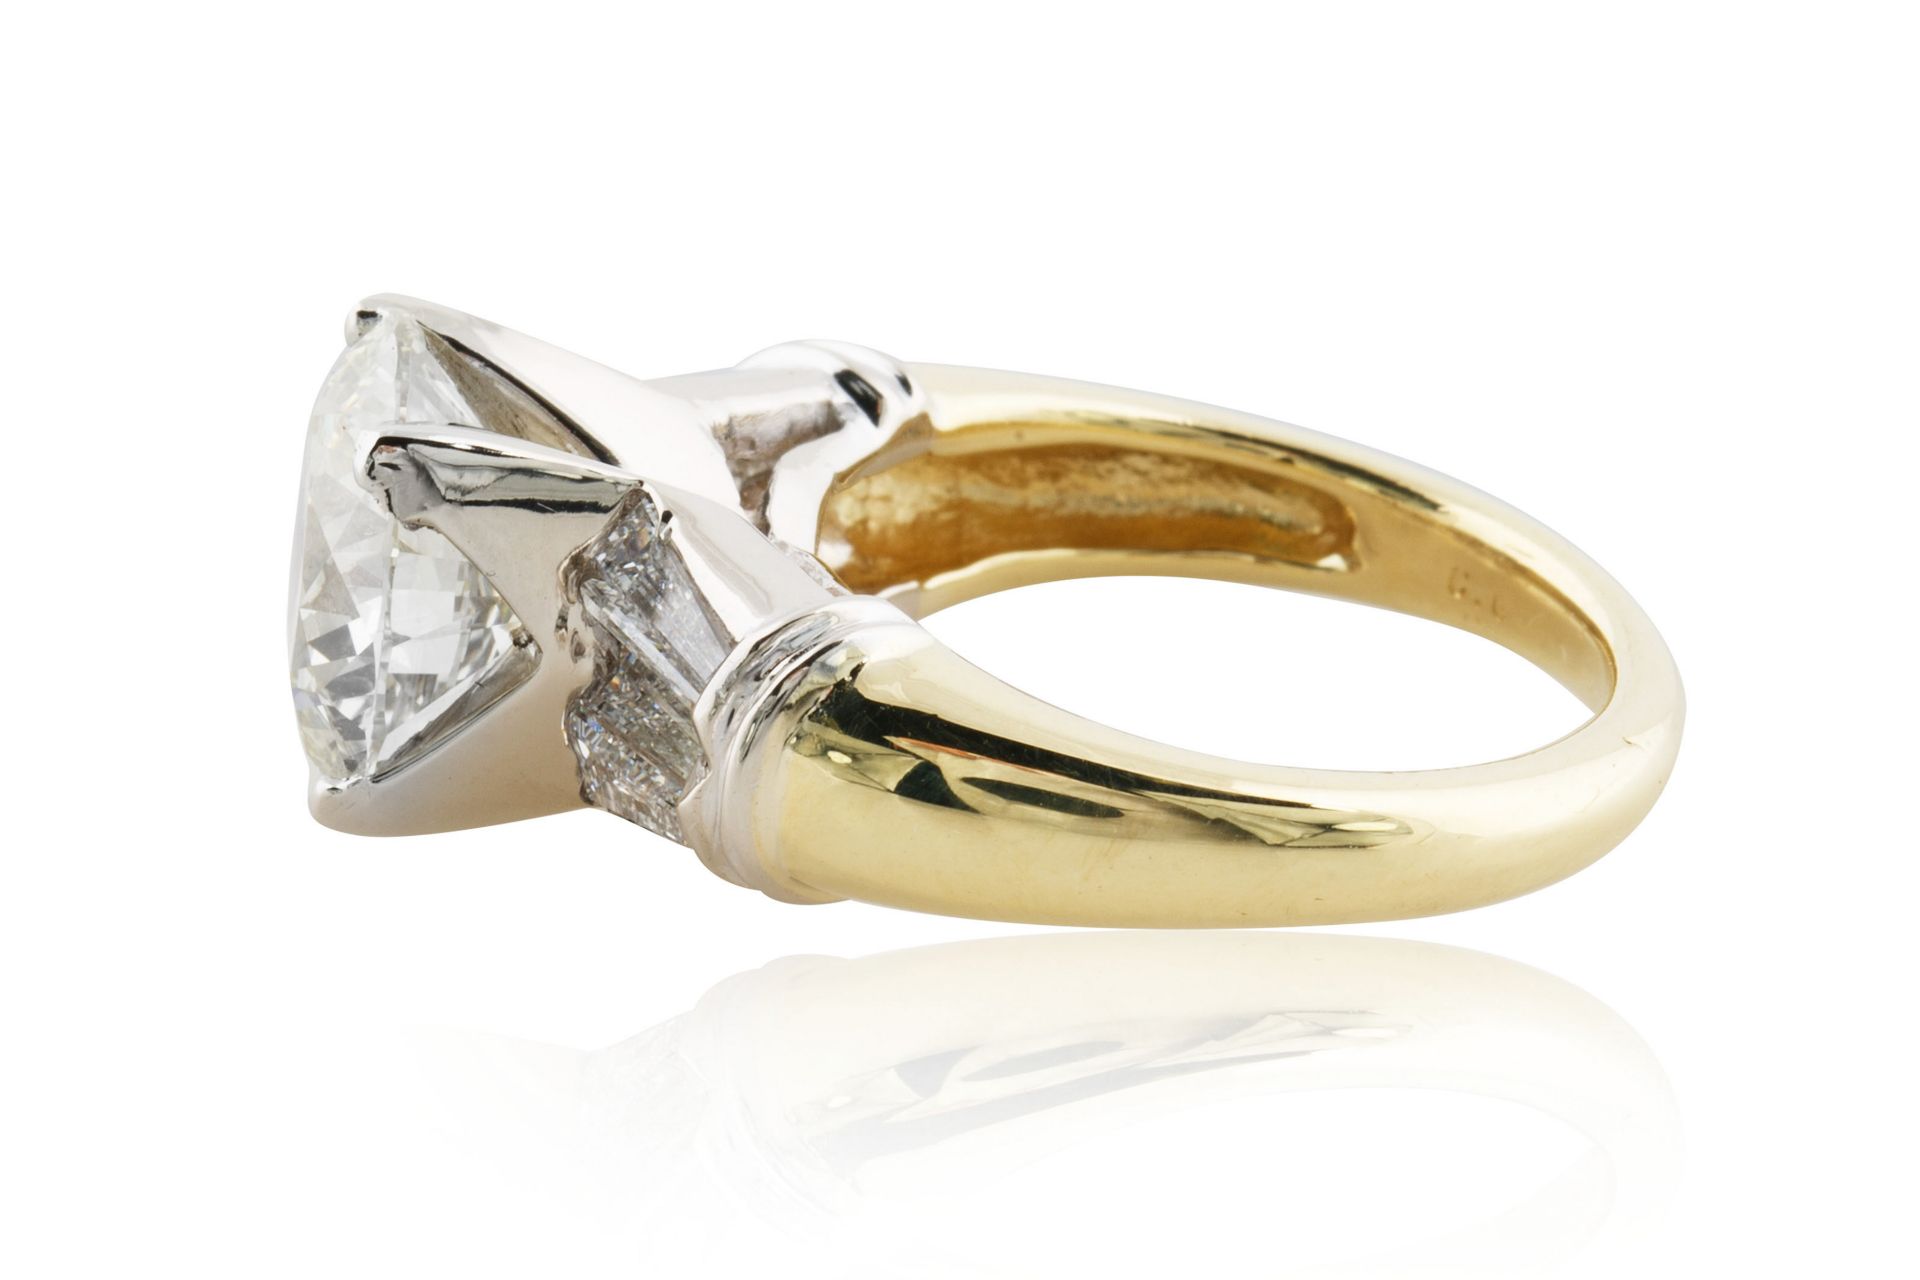 A 4.30 CT BRILLIANT ROUND CUT DIAMOND RING SET IN 18KT GOLD BAND - Image 2 of 7